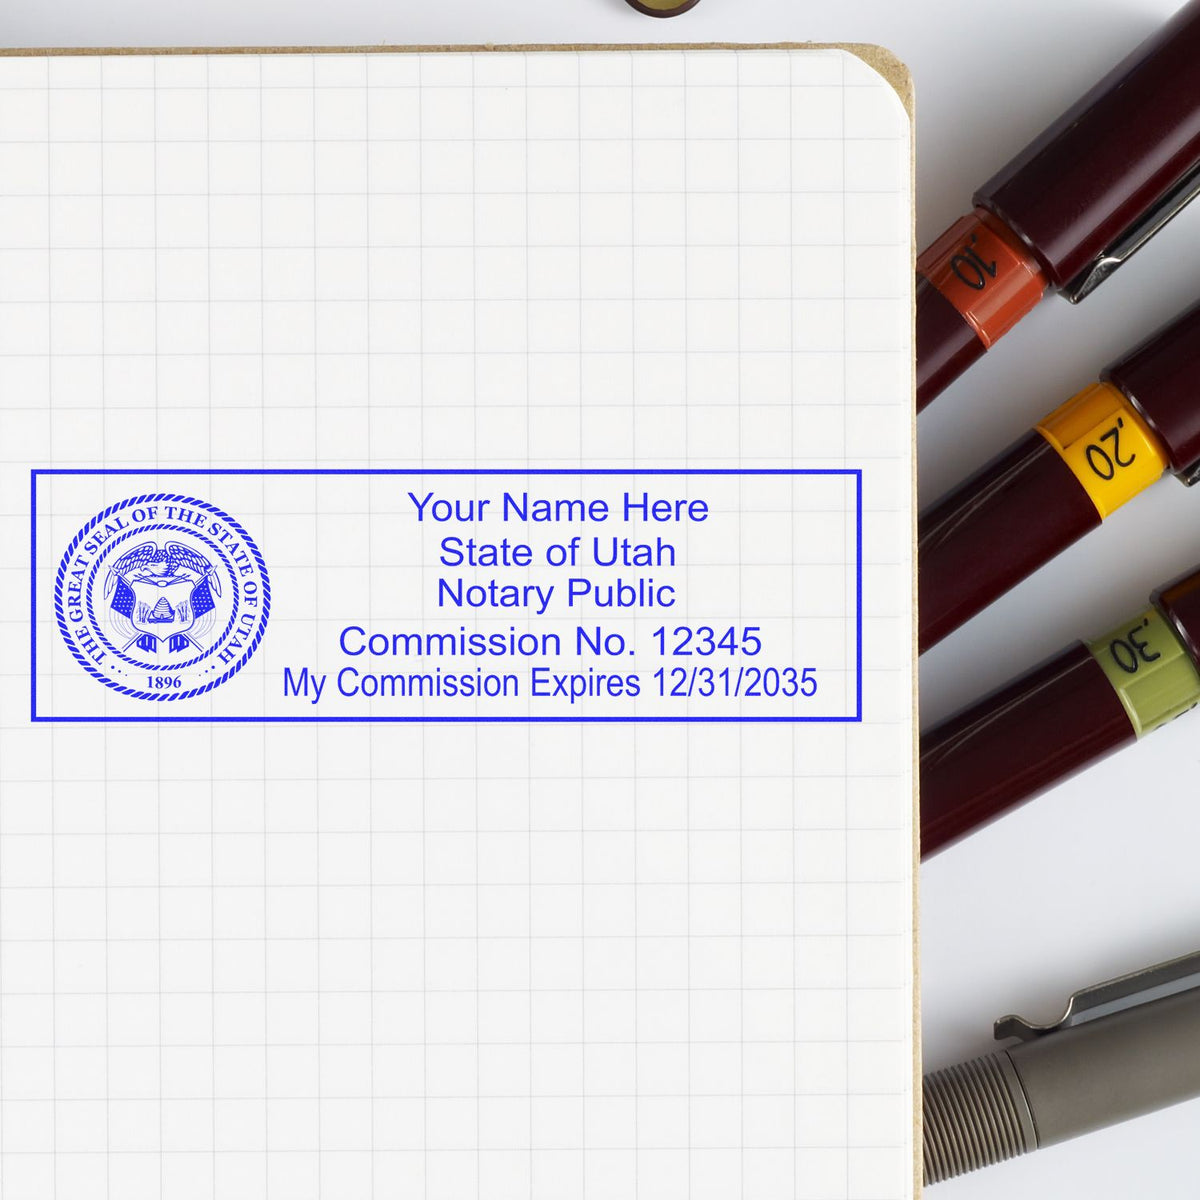 An alternative view of the PSI Utah Notary Stamp stamped on a sheet of paper showing the image in use